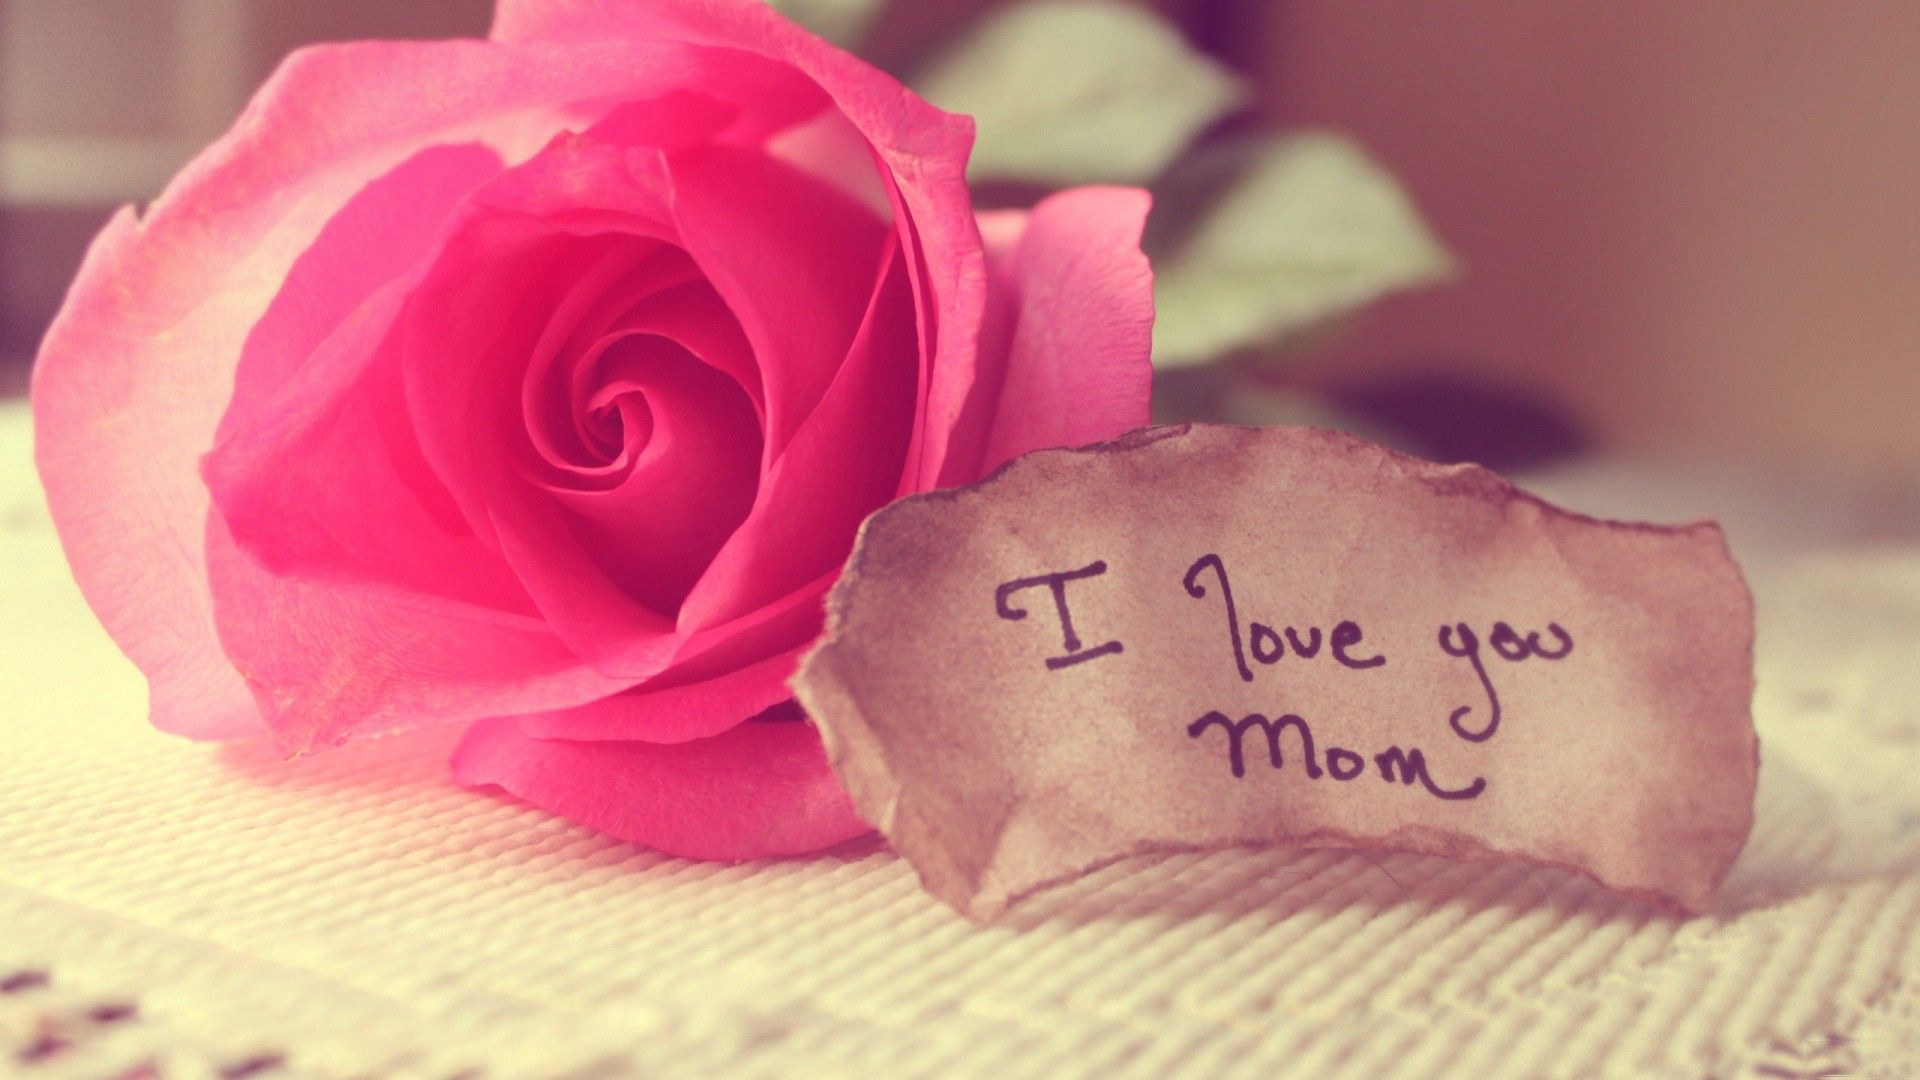 Words I Love You Mom In Small Paper And Rose 2K Mom Dad